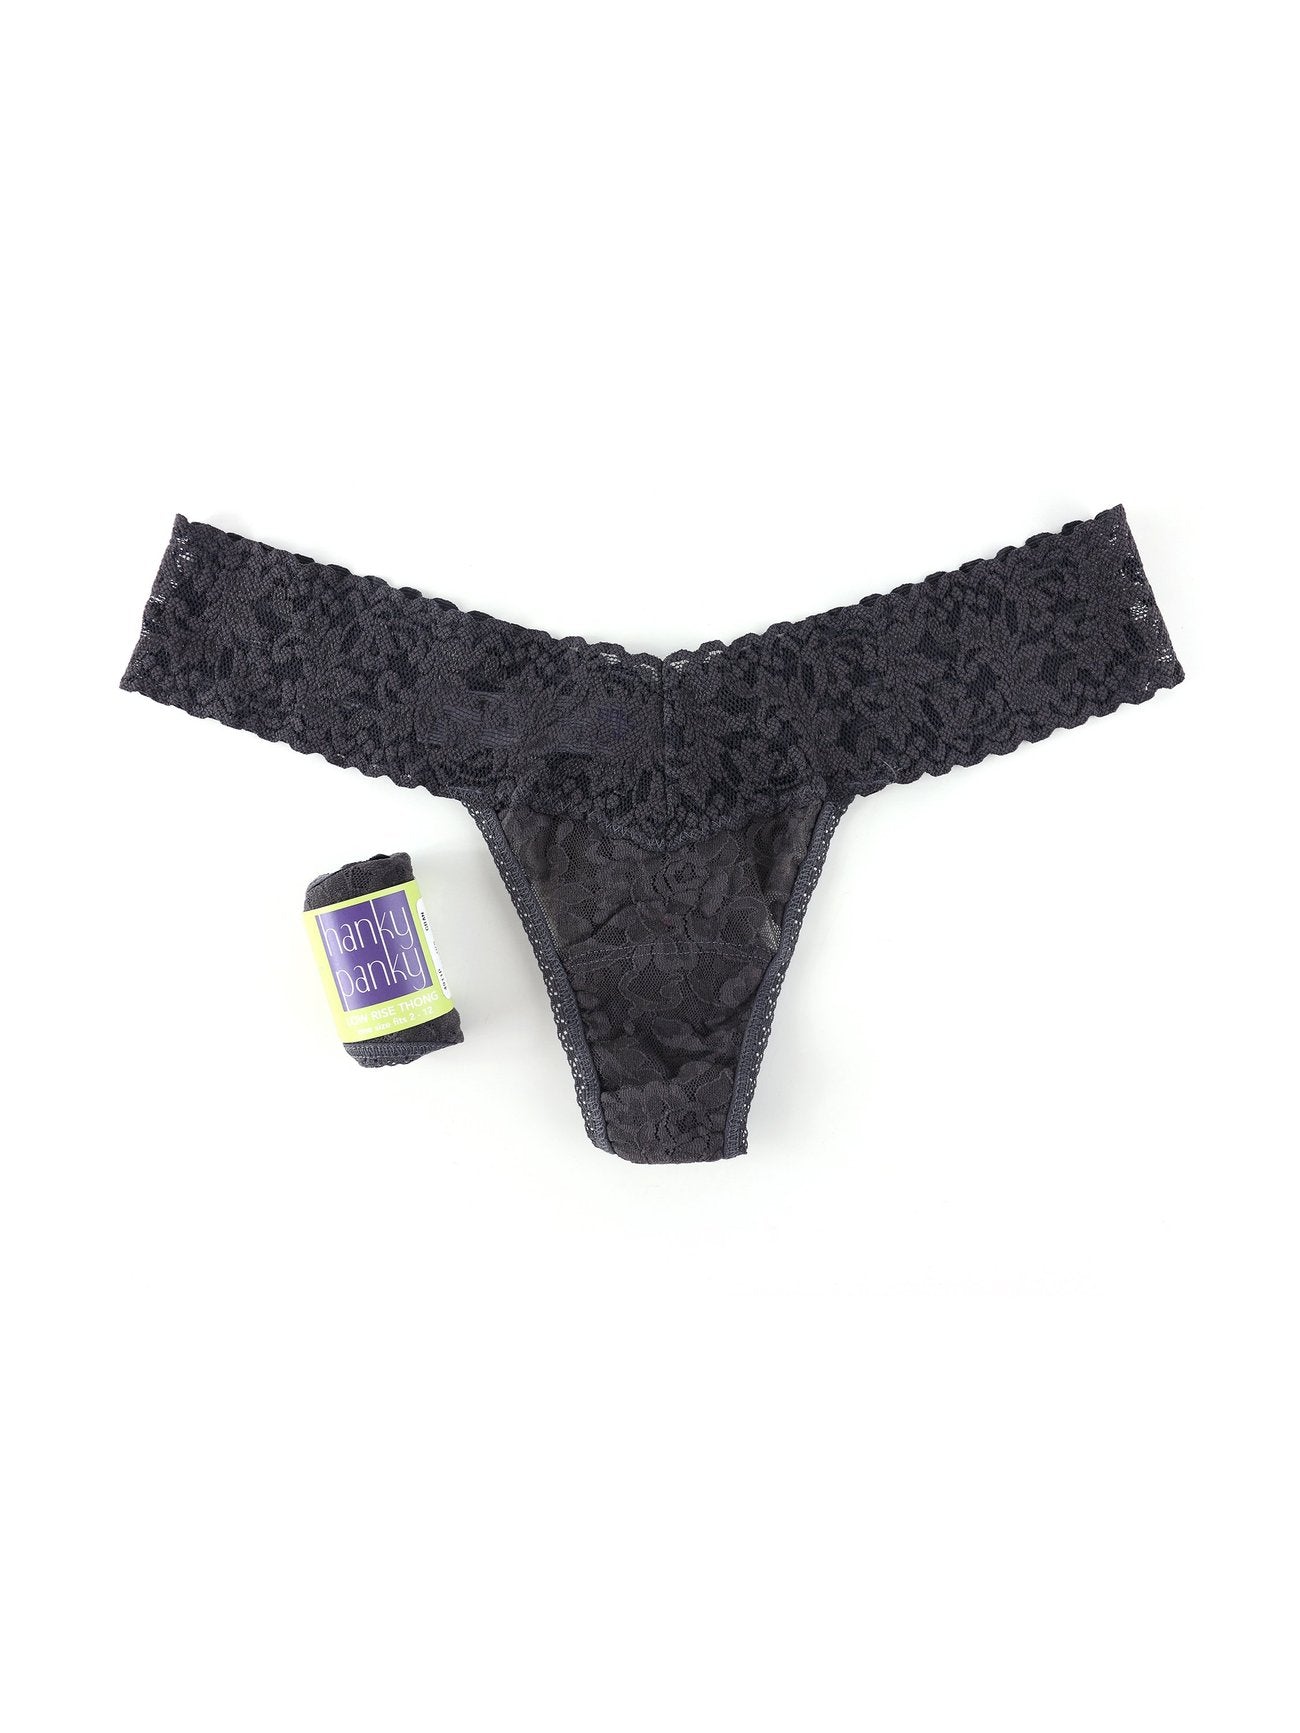 Buy granite Hanky Panky Signature Lace Low Rise Thong - Packaged 4911p